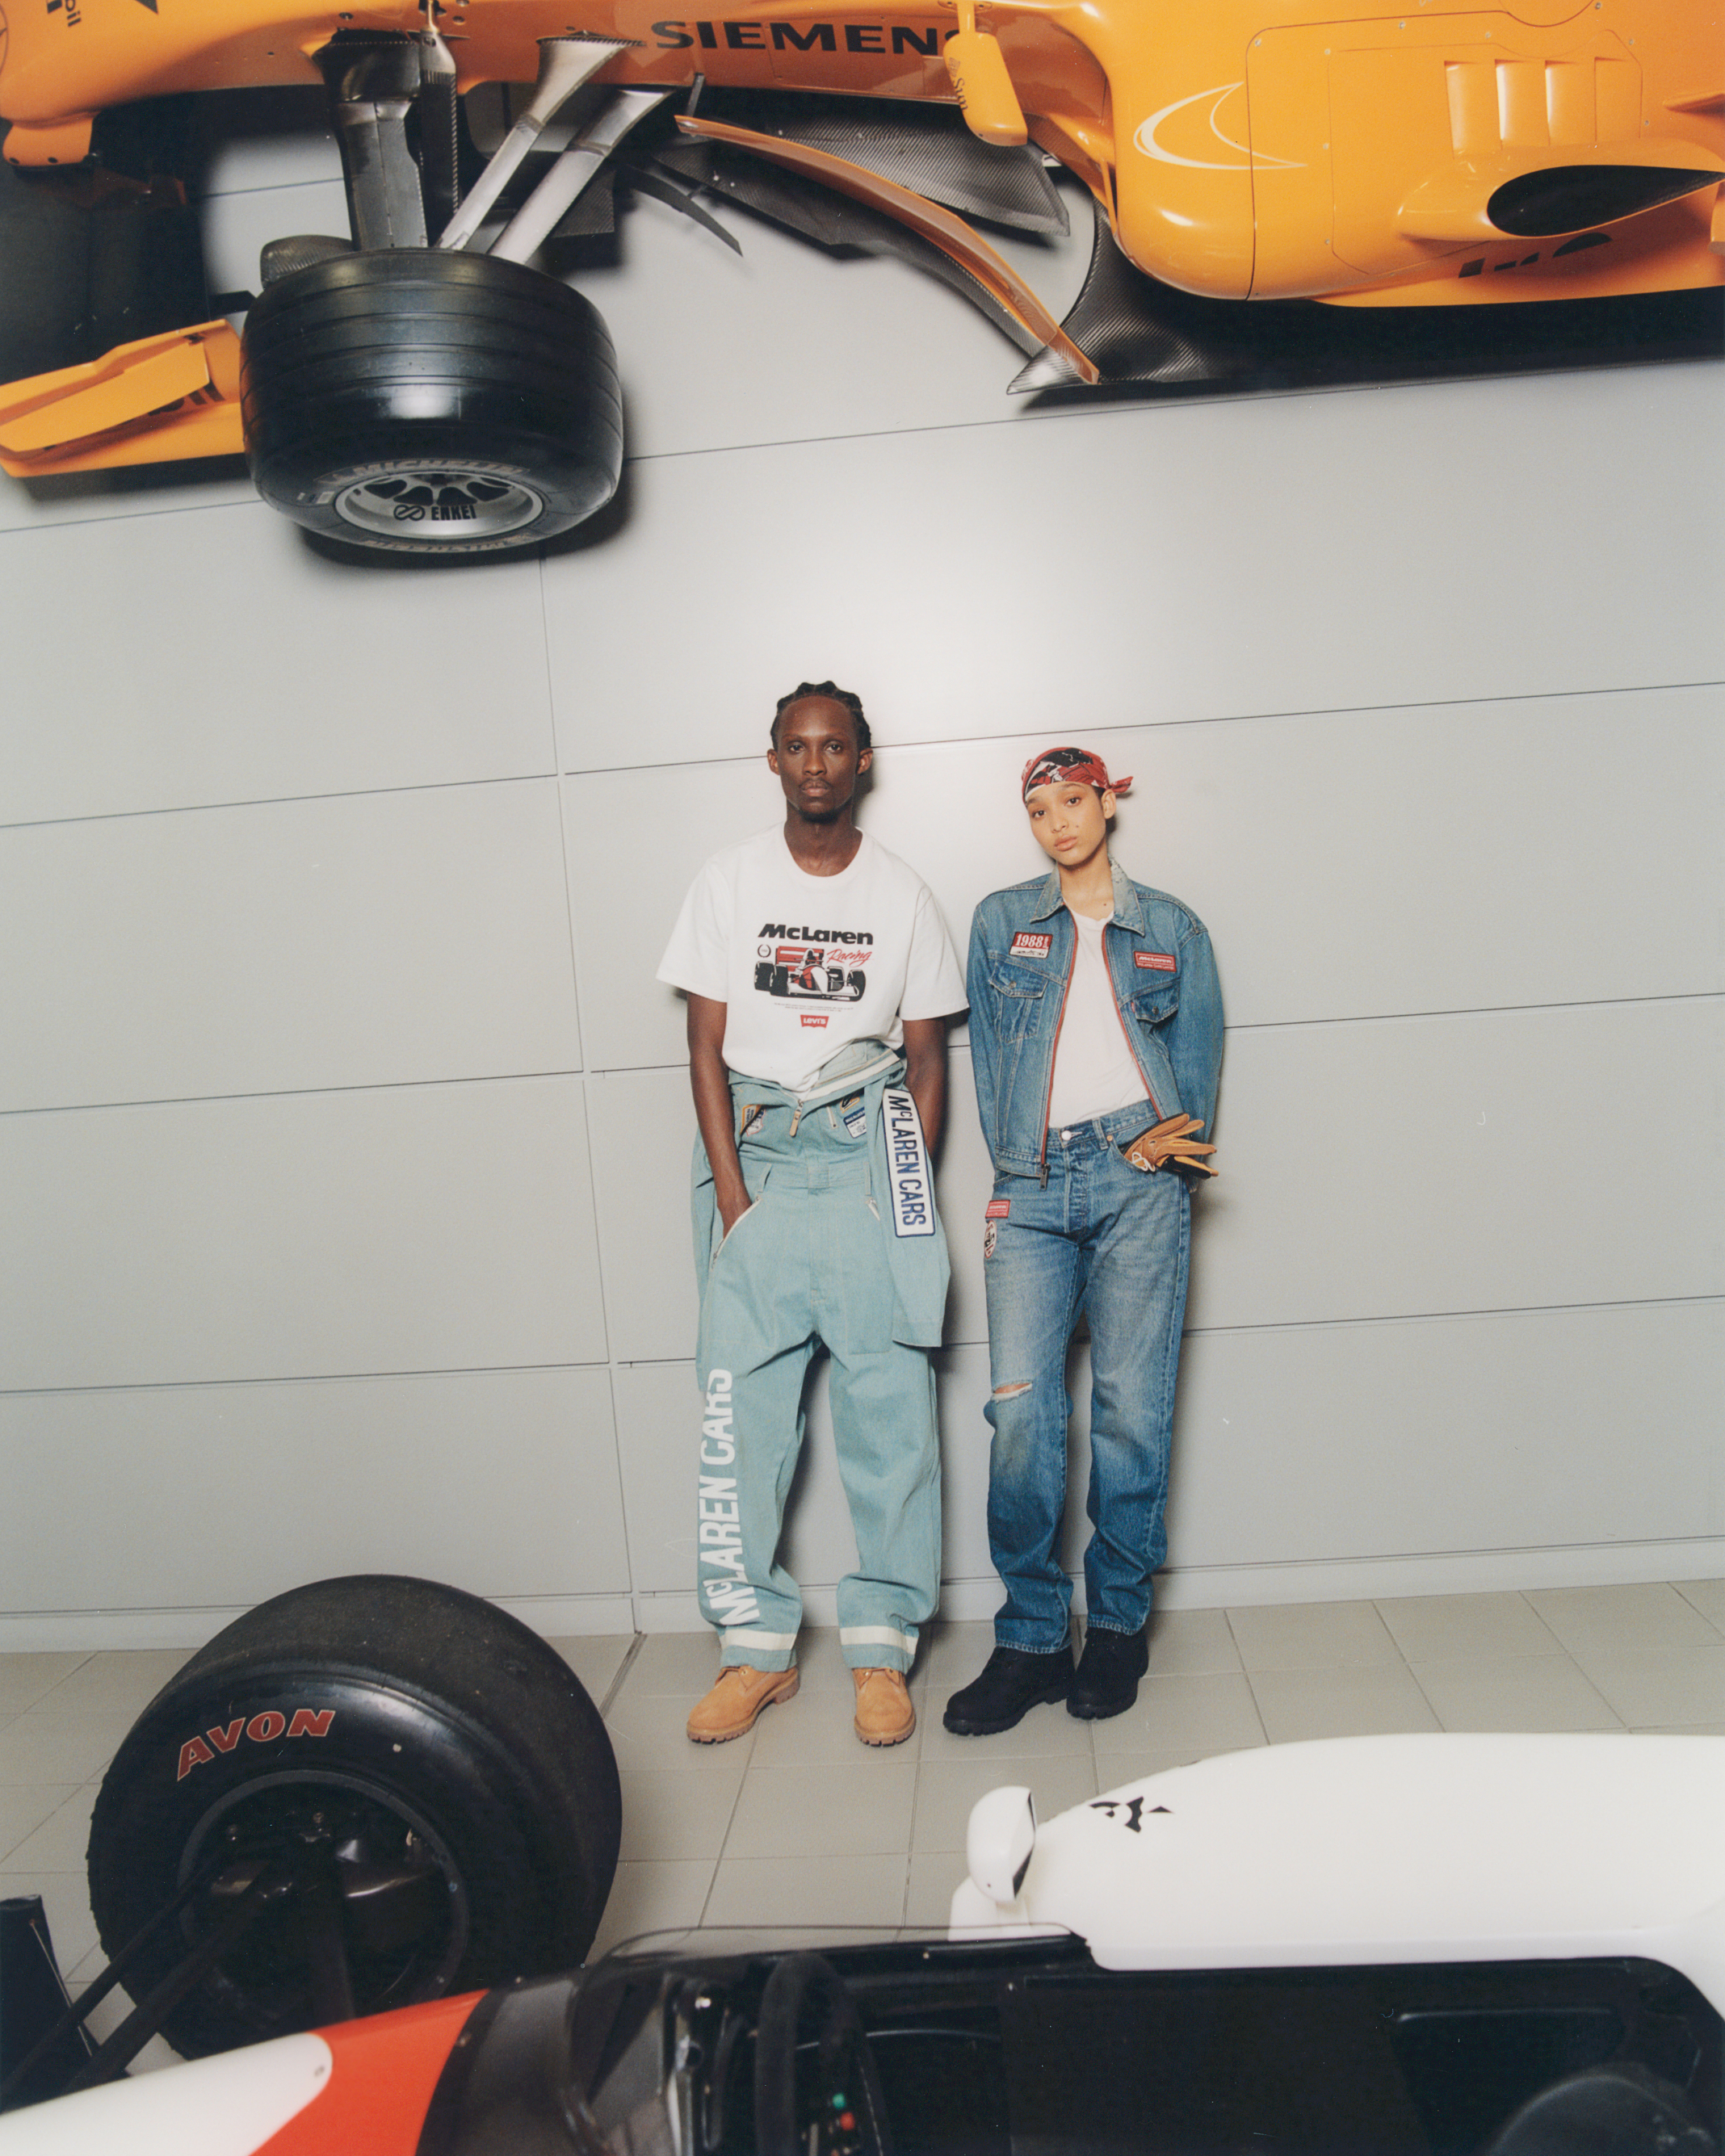 Two people standing in front of cars: one in a printed t-shirt and overalls, the other in a denim jacket and jeans with a headscarf